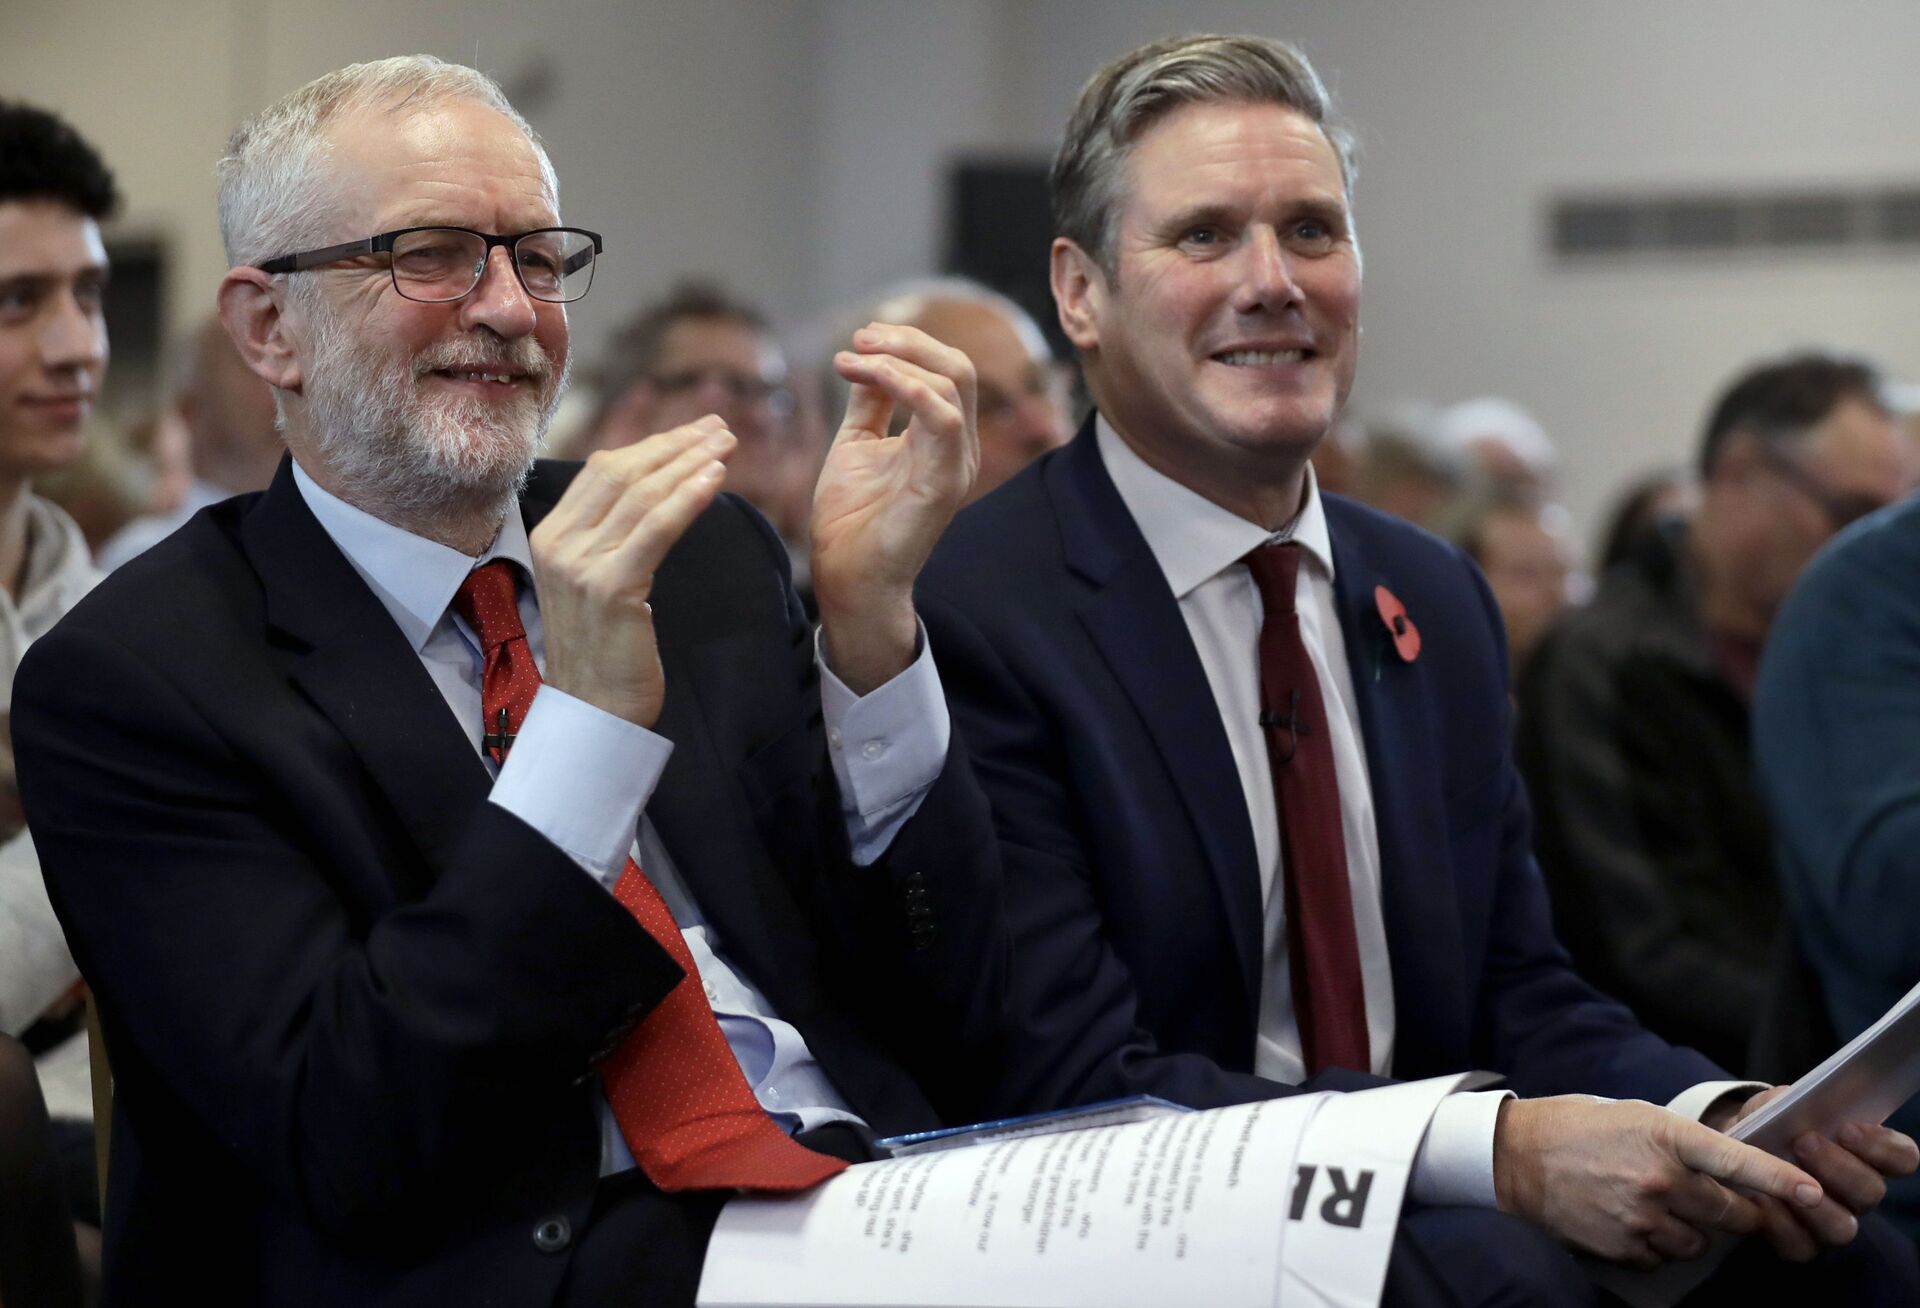 UK Trade Union Leader Warns Keir Starmer Is Turning Labour Into 'Party of the Establishment' - Sputnik International, 1920, 21.03.2021